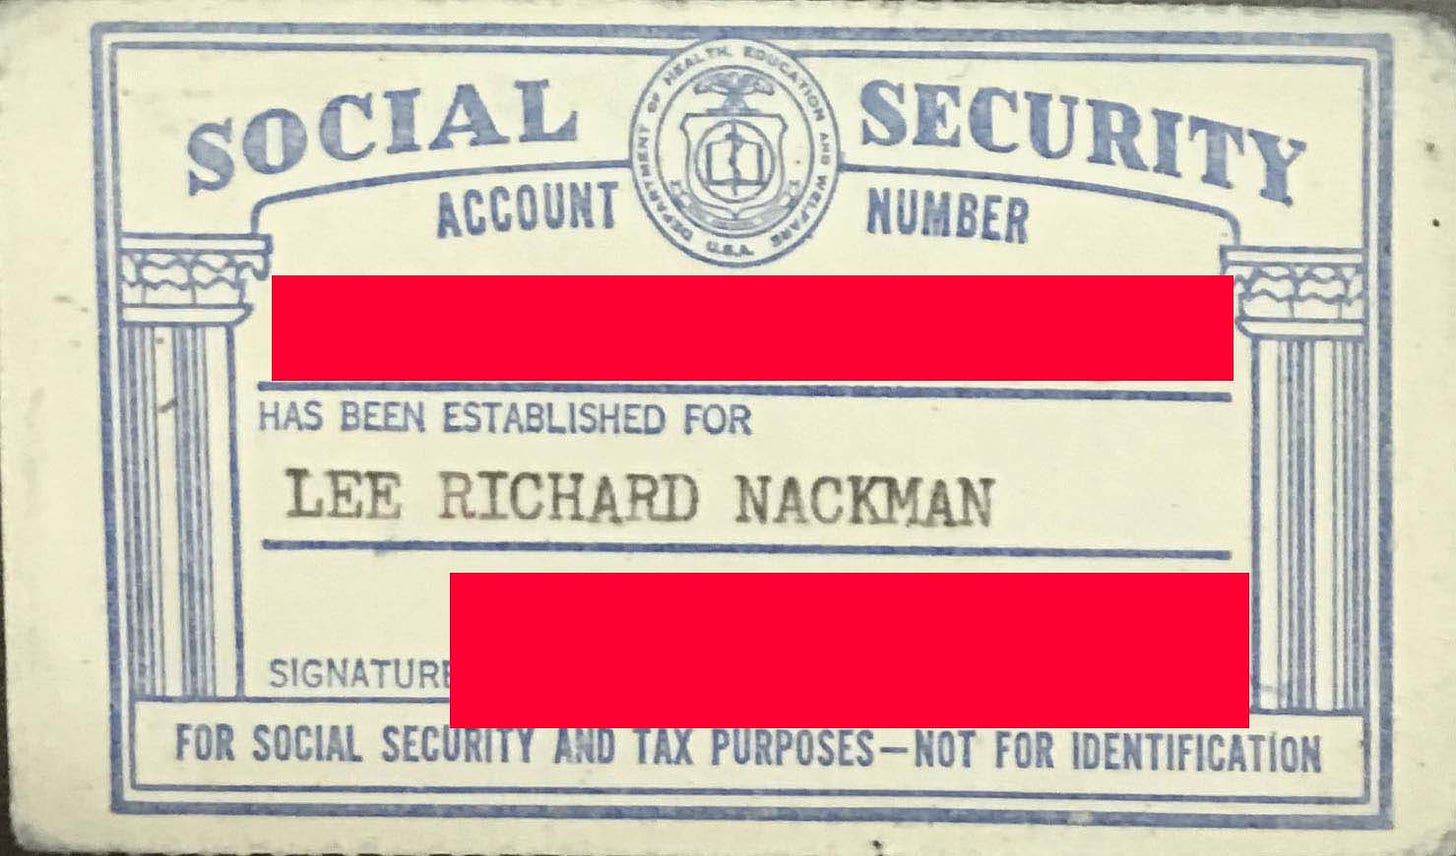 Social security card with personal information obscured.